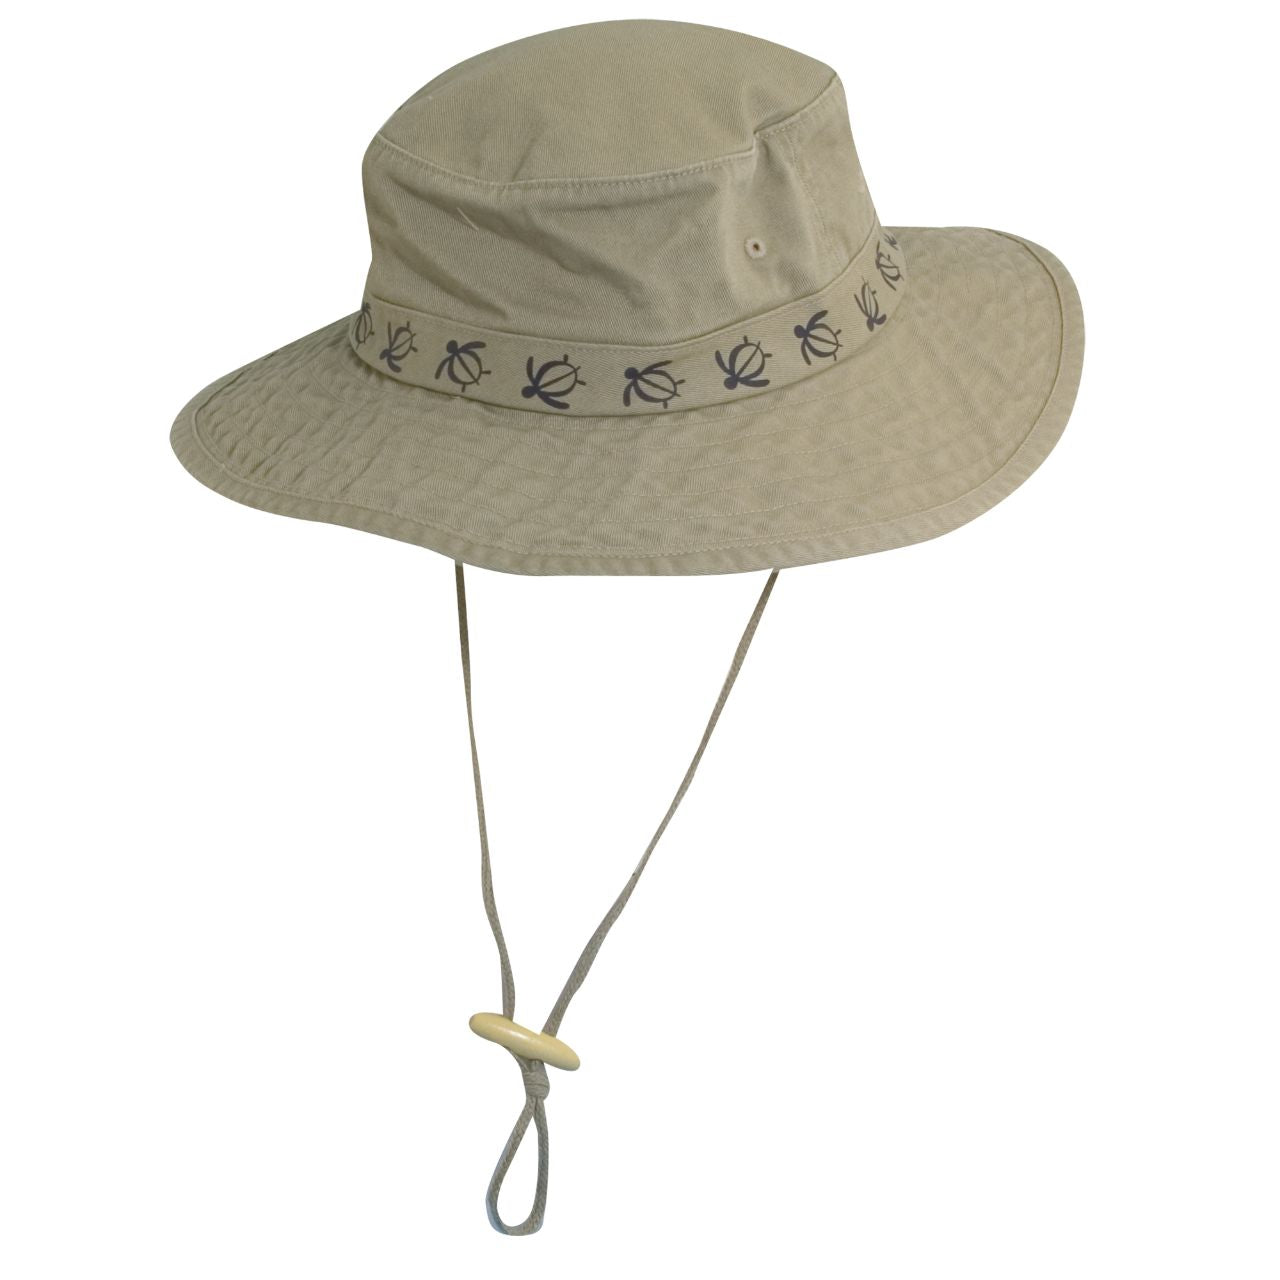 Cotton Boonie Hat with Turtle Tape Band - DPC Outdoor Hats Khaki/Navy / Large (59 cm)